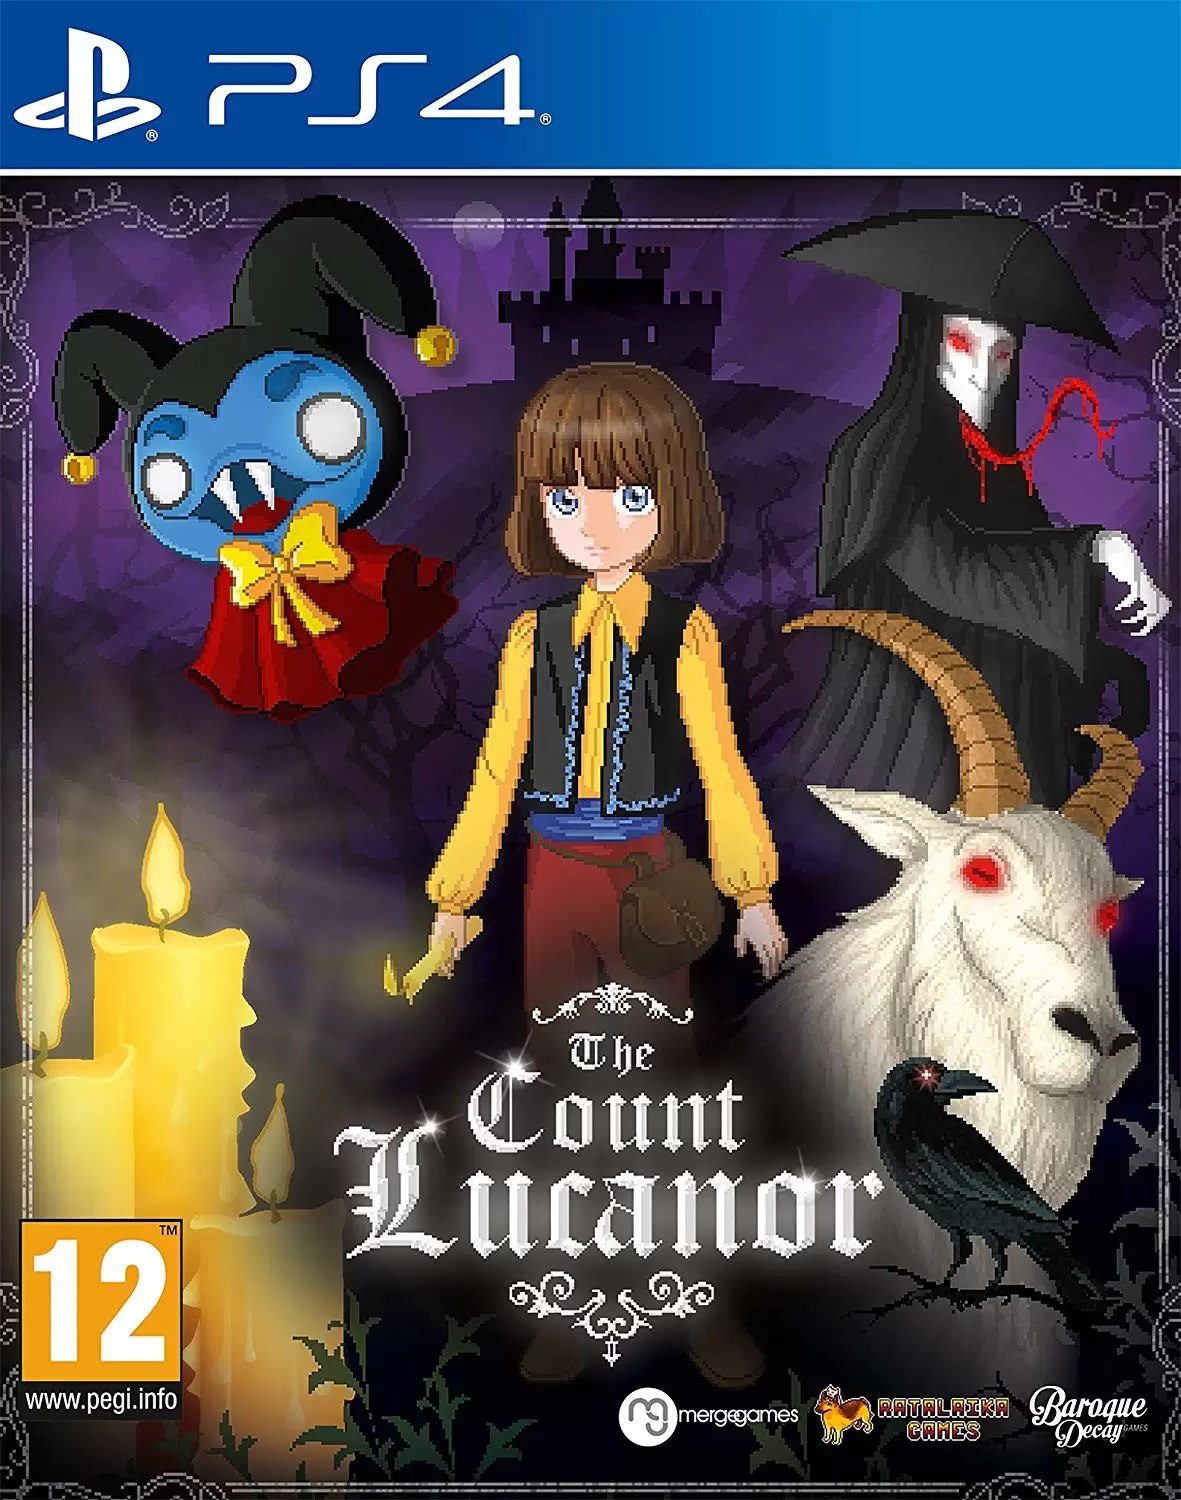 Jeux PS4 - The Count Lucanor